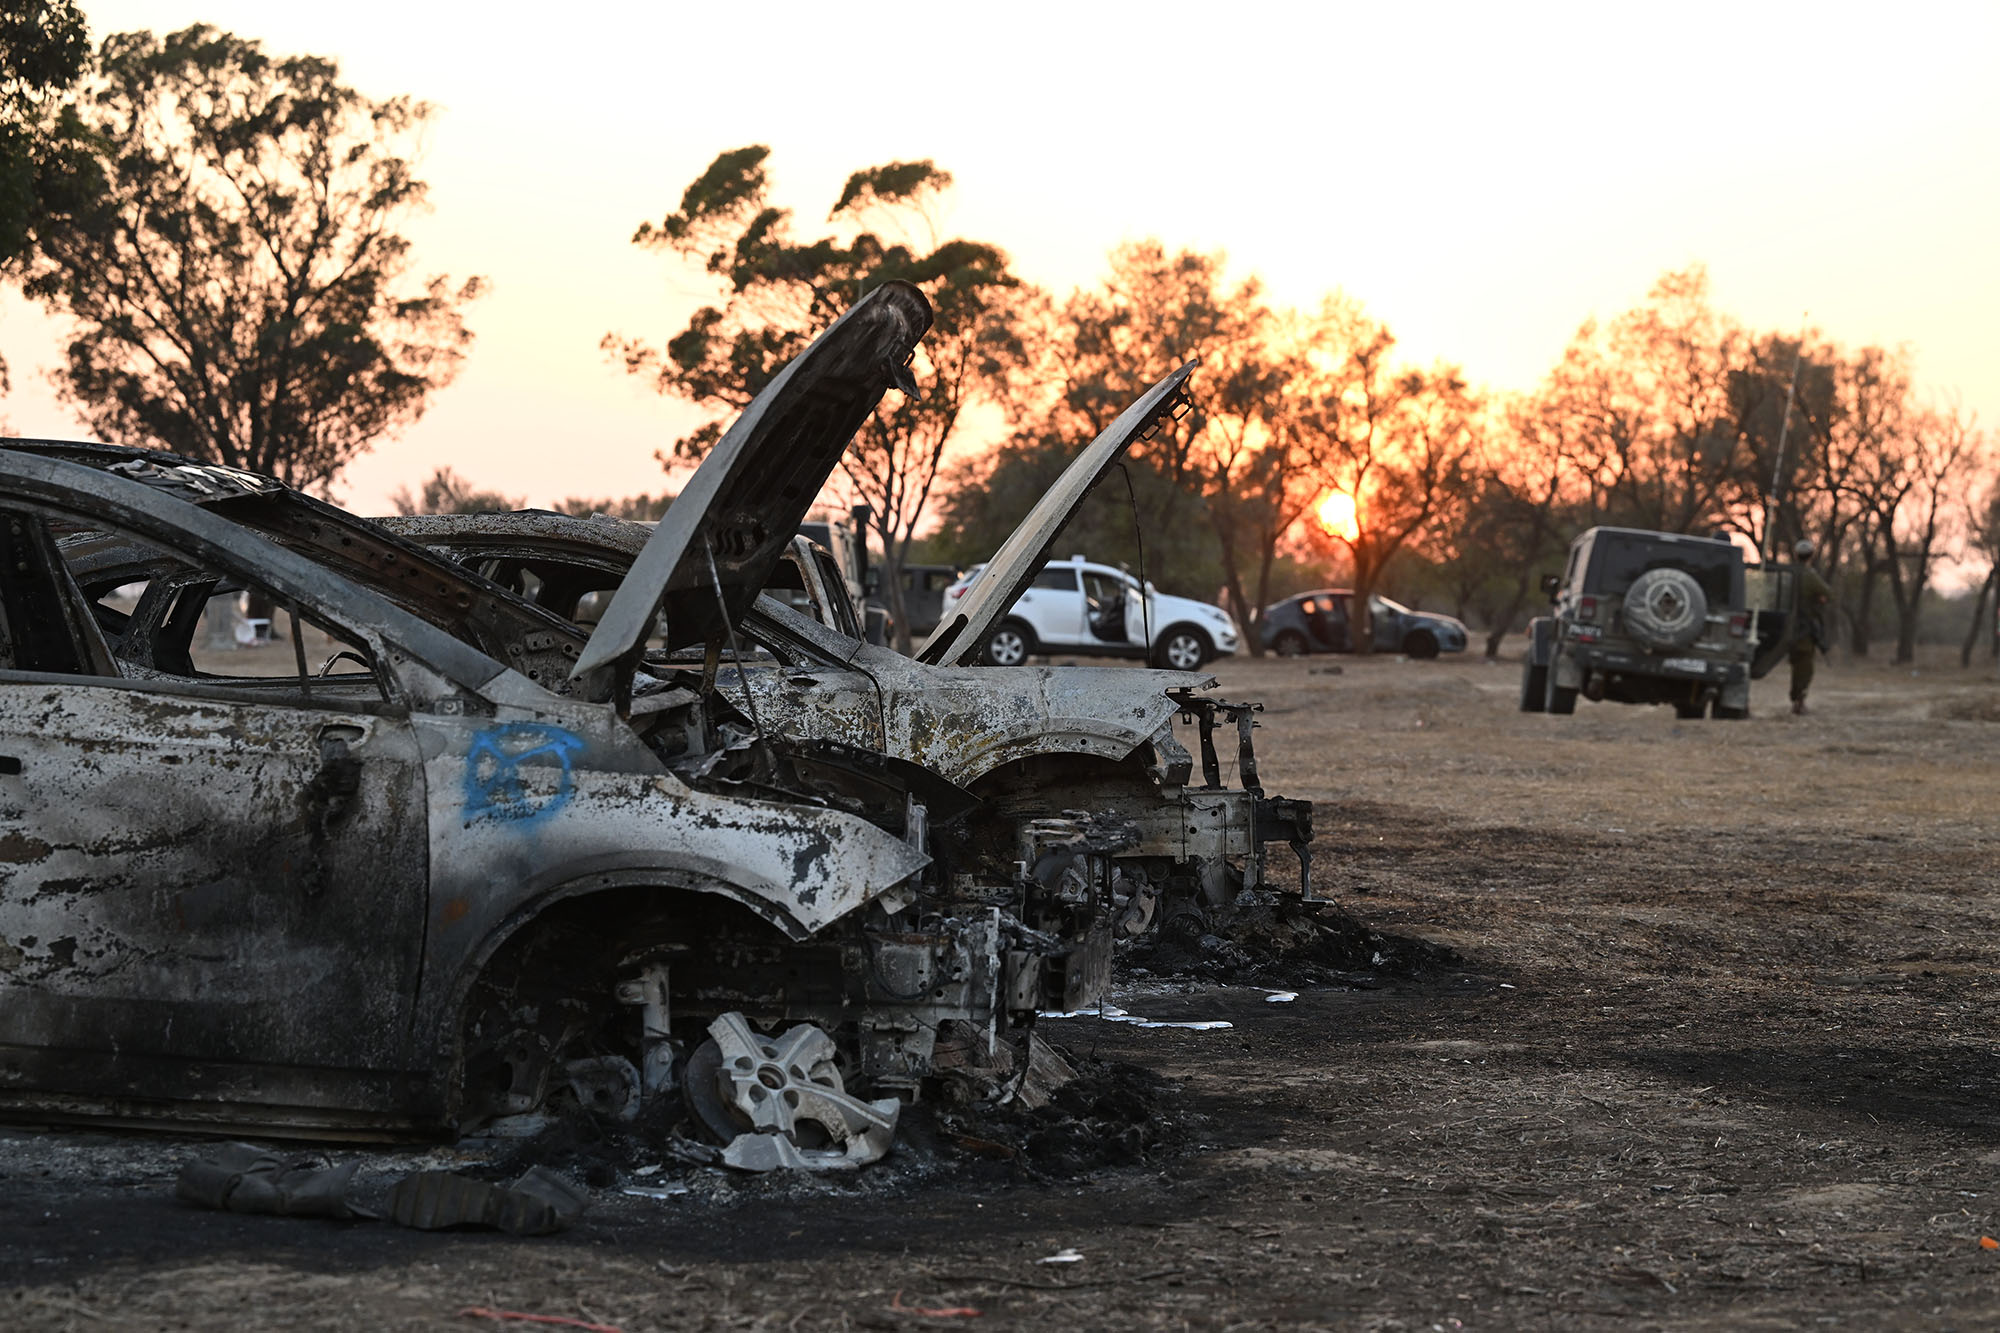 Burnt out cars at the scene as Israeli soldiers continue to search for ID and belongings among the cars and tents at the Nova Music Festival site in Israel on October 12.